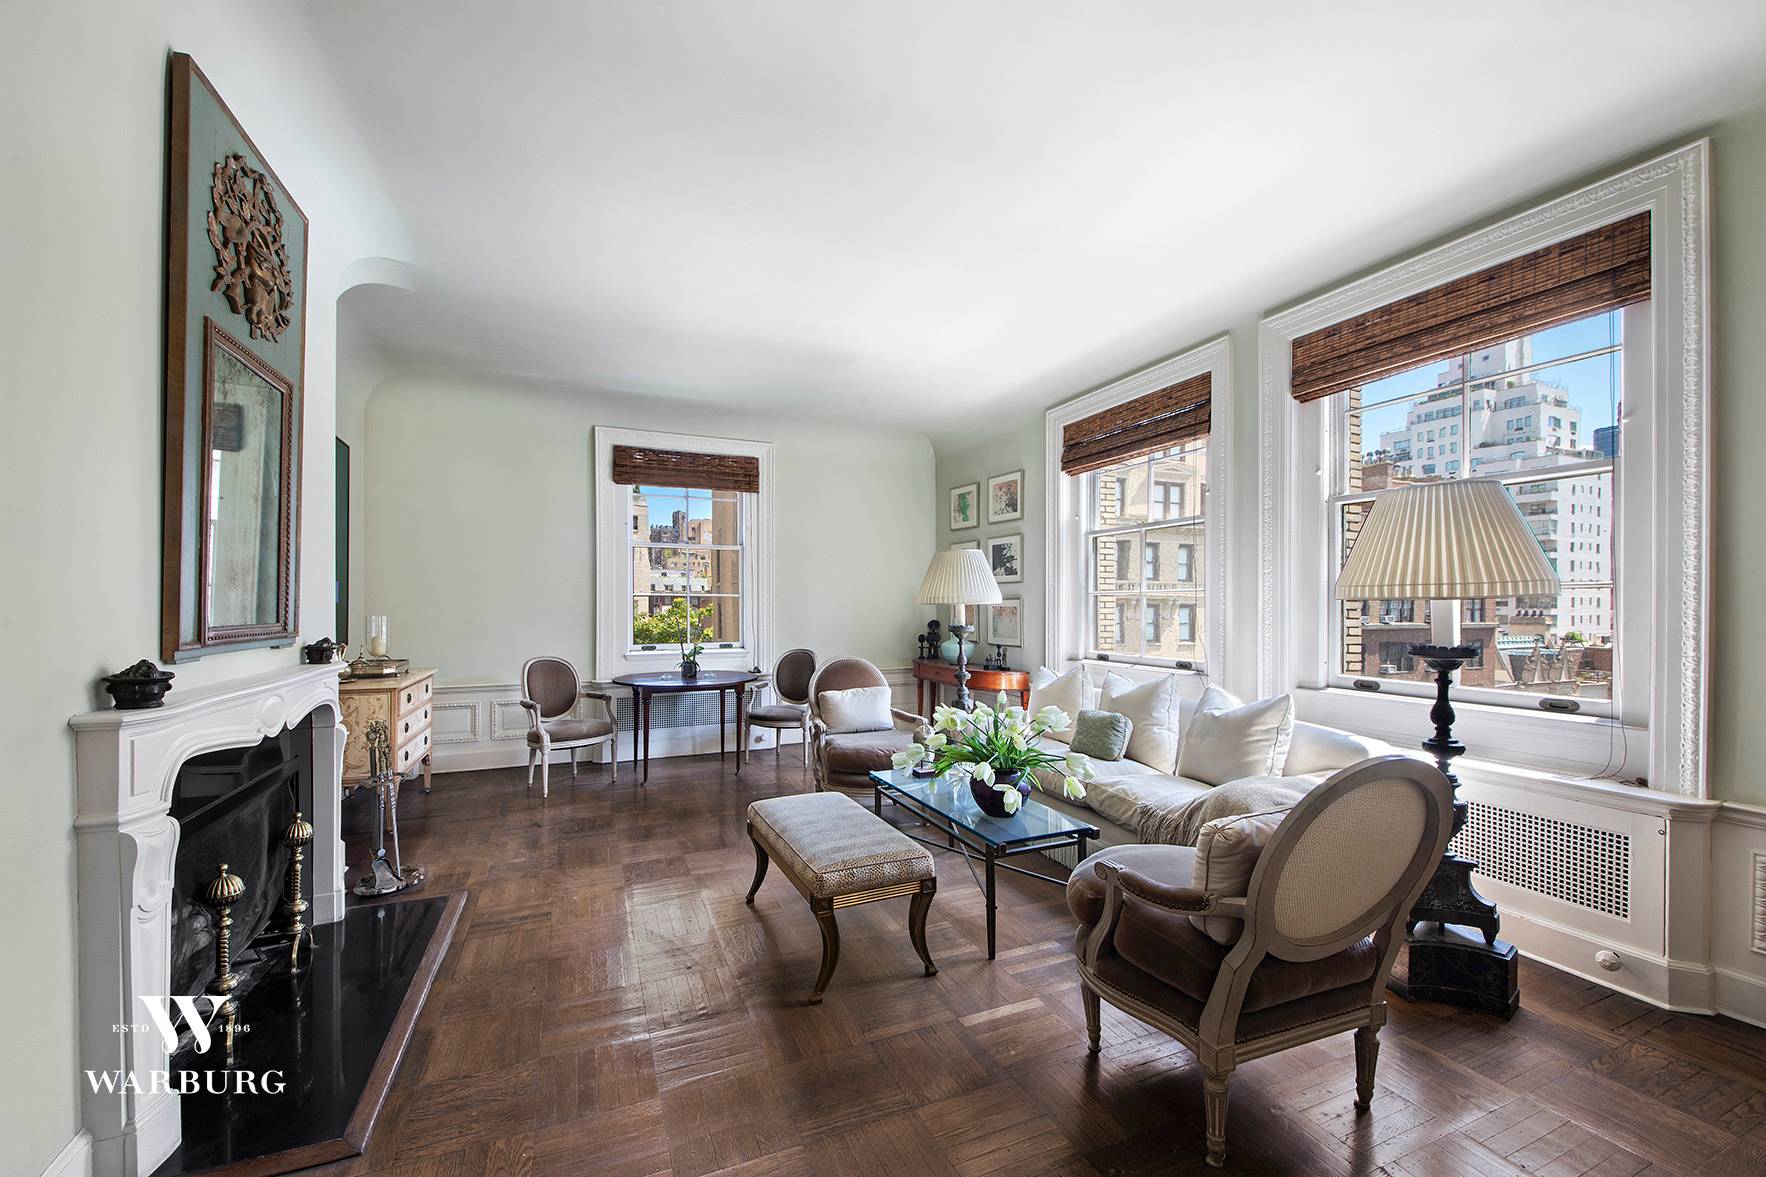 European elegance highlights this one bedroom, one and a half bath apartment as soon as you enter its gallery with 10' ceilings and old world detail.